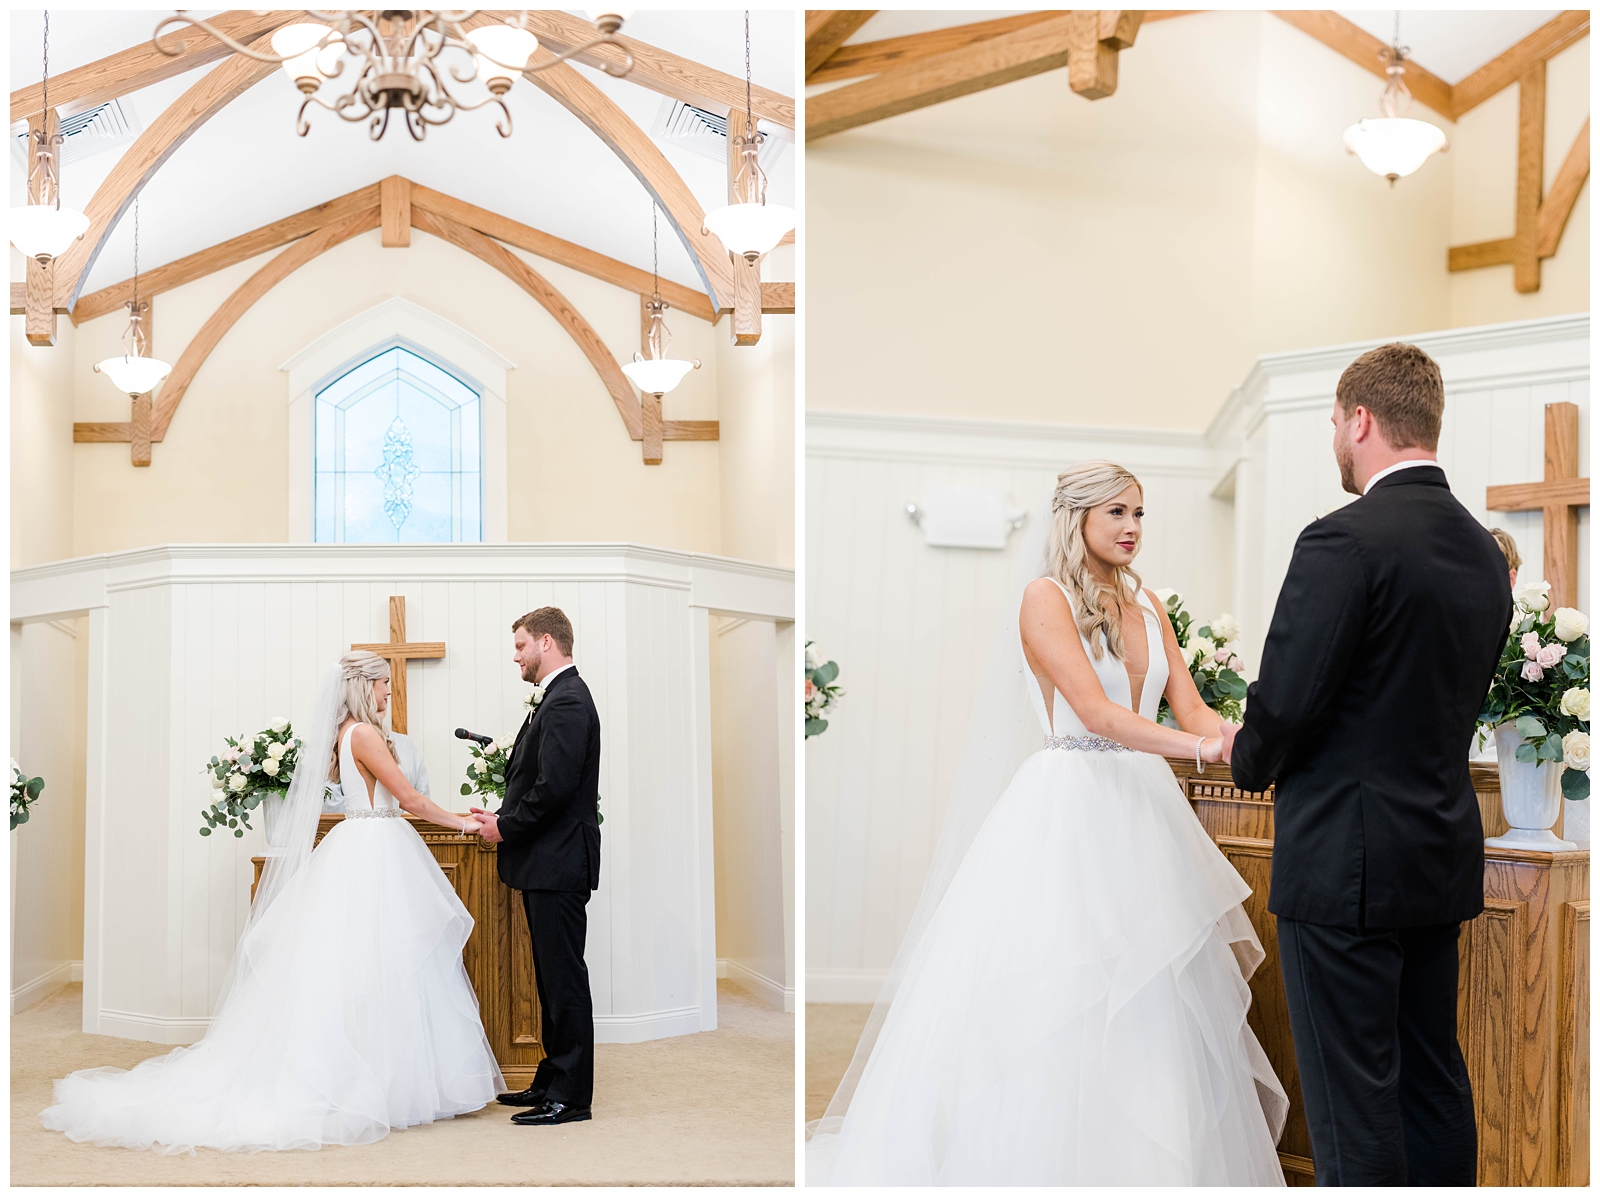 Indoor ceremony at Eagle Eye Golf Course